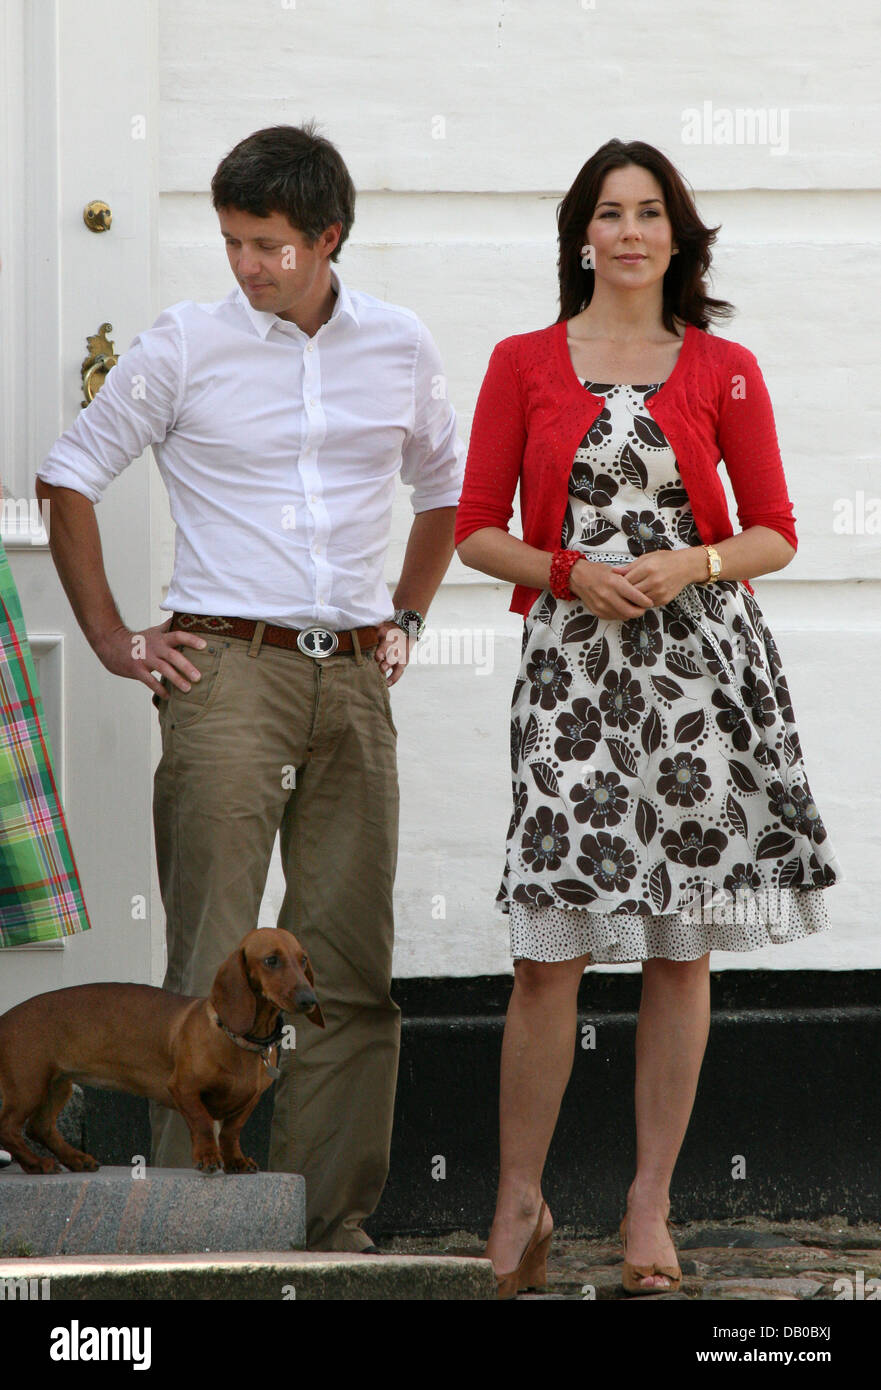 crown-prince-frederik-of-denmark-l-and-his-wife-crown-princess-mary-DB0BXJ.jpg